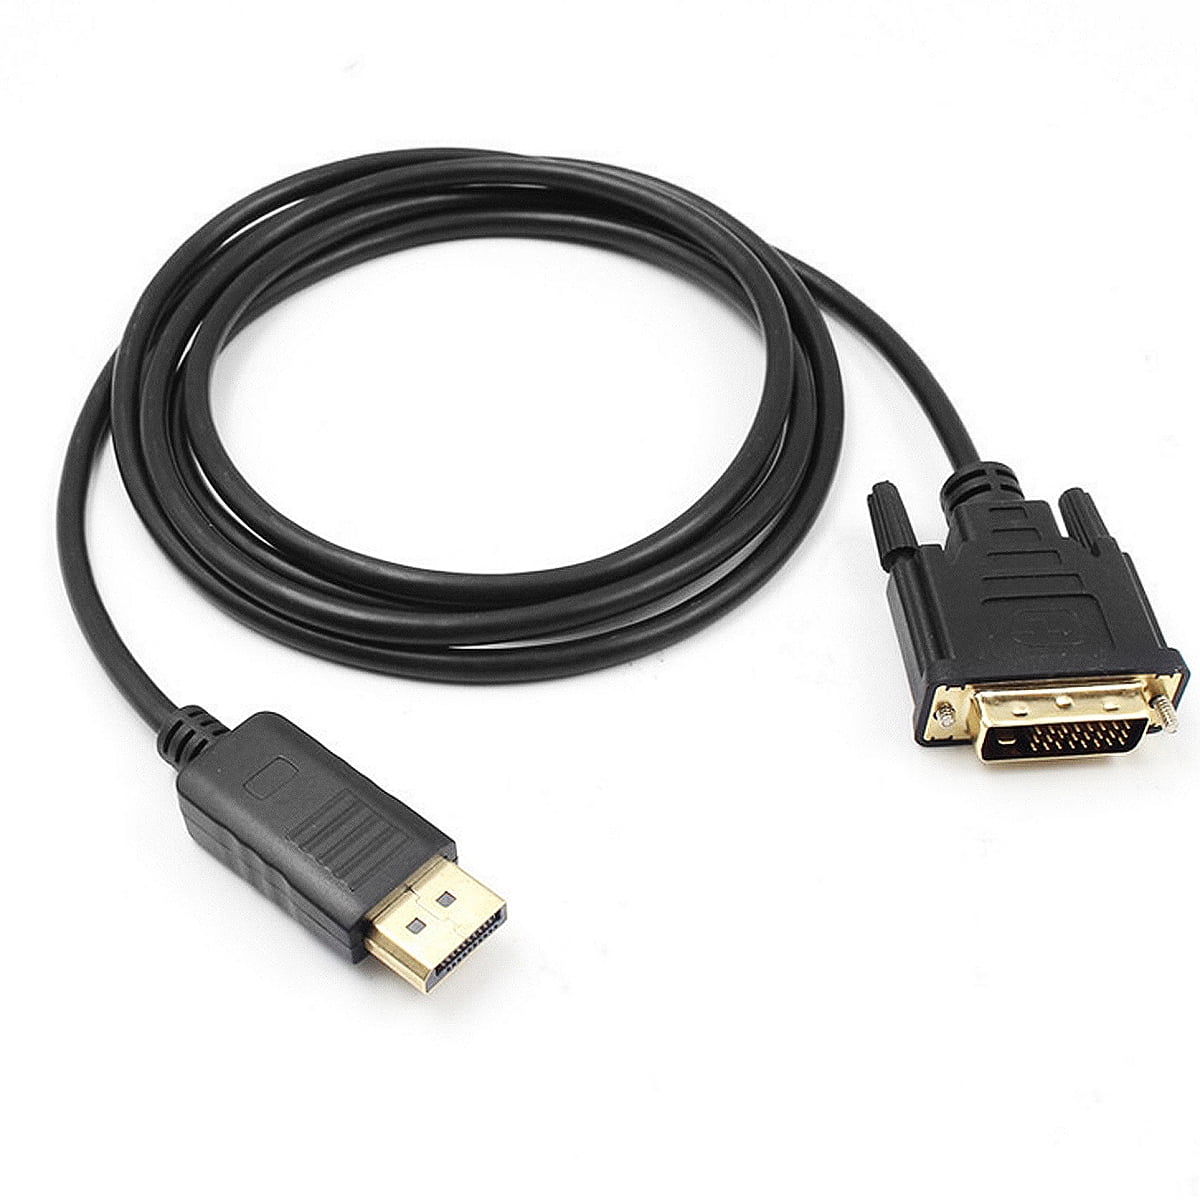 DVI 24+1 Male To Male HDTV Video Cable Cord For Computers HDTV LCD lot be1 